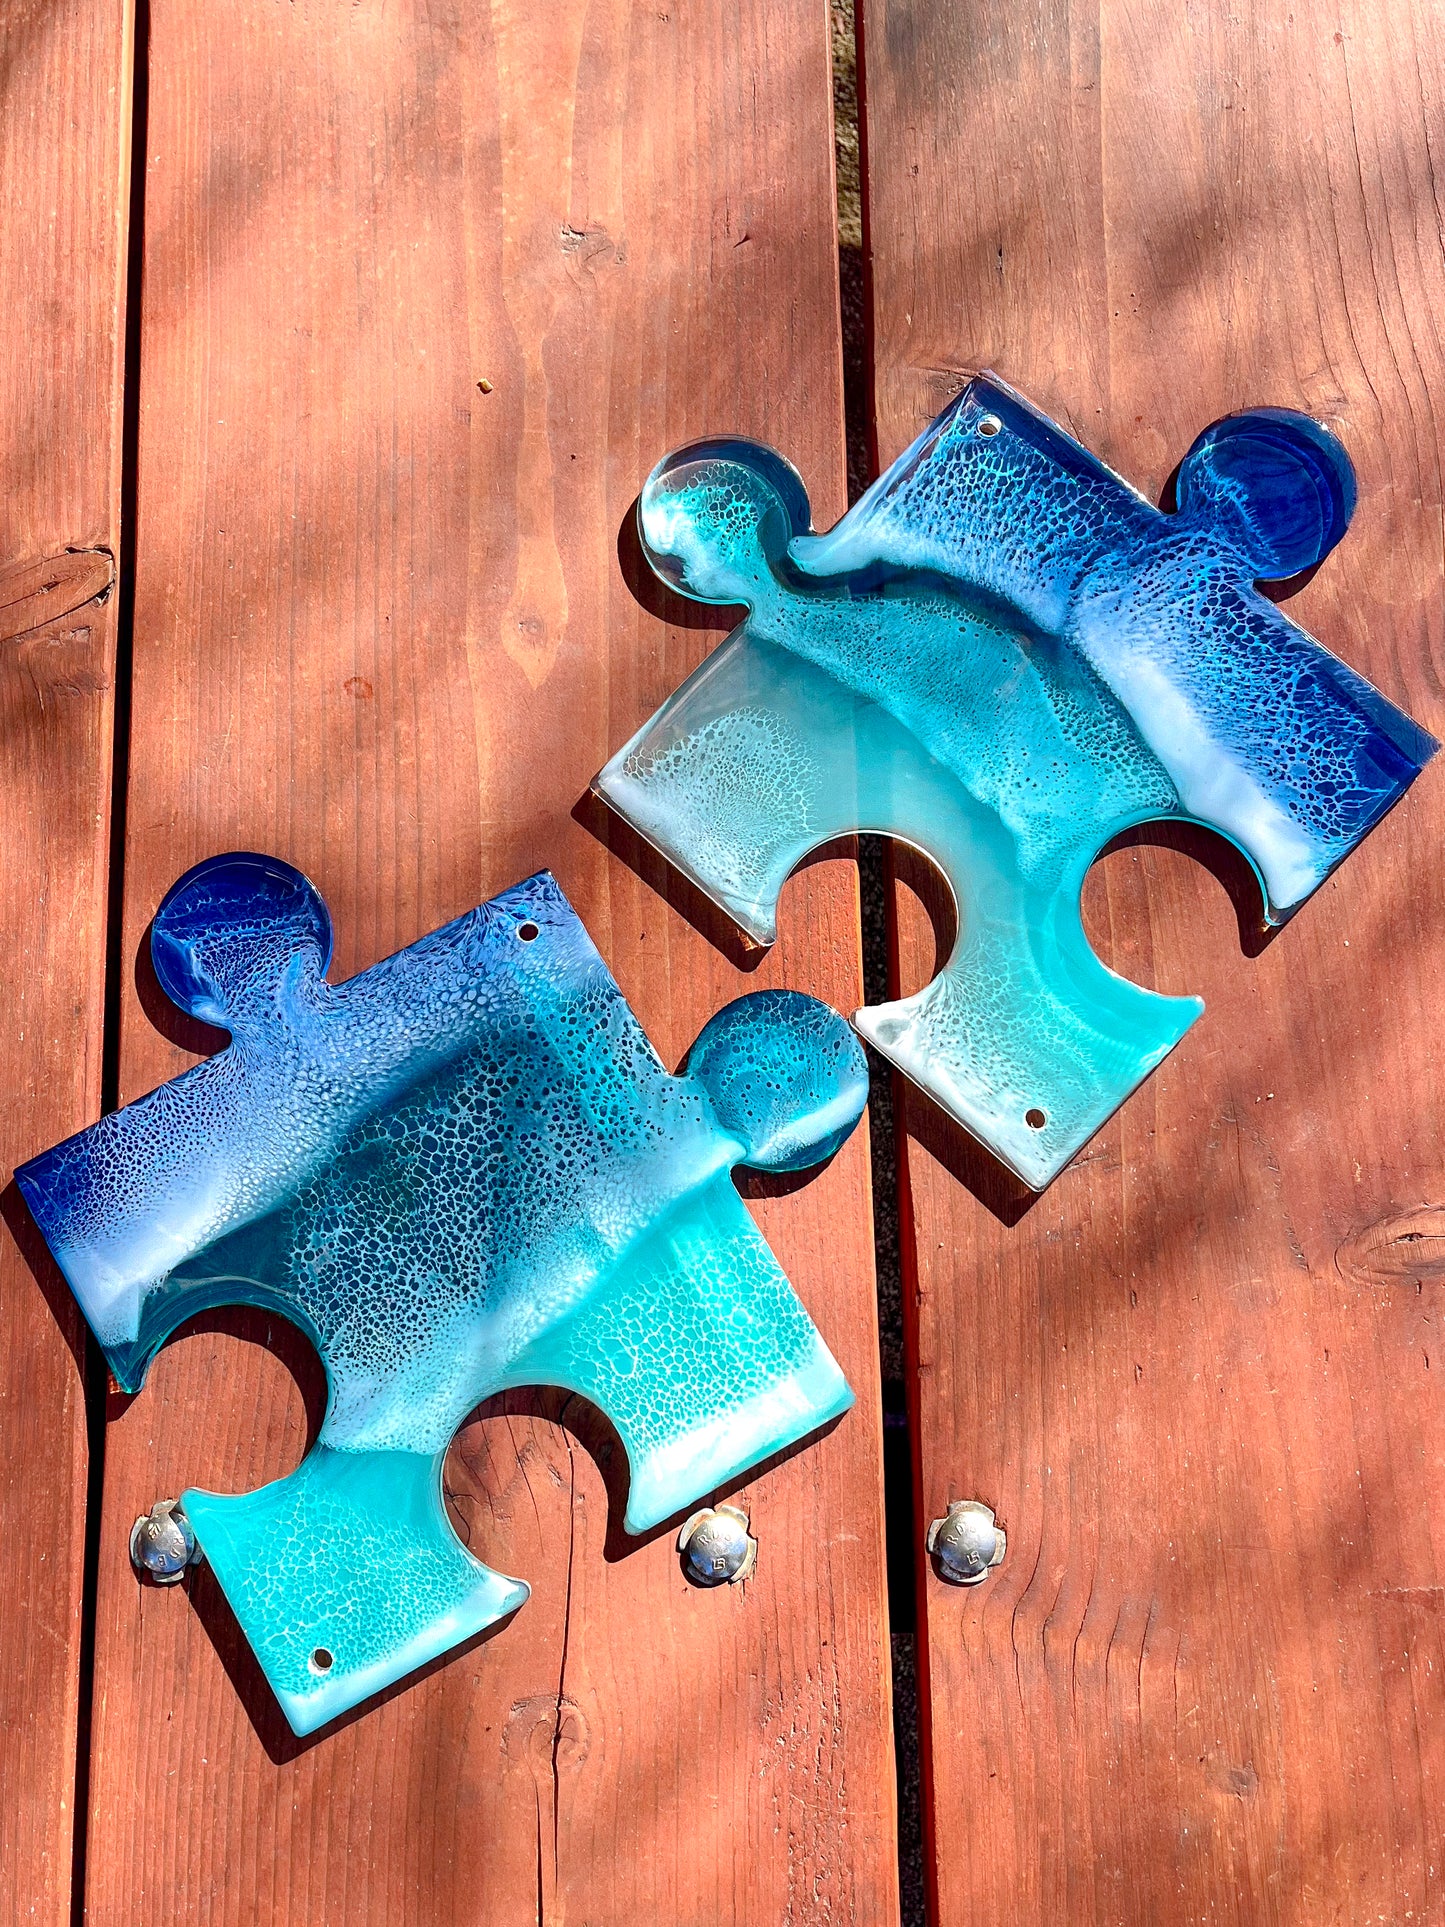 See-through, blue, stained glass ocean wave puzzle pieces.